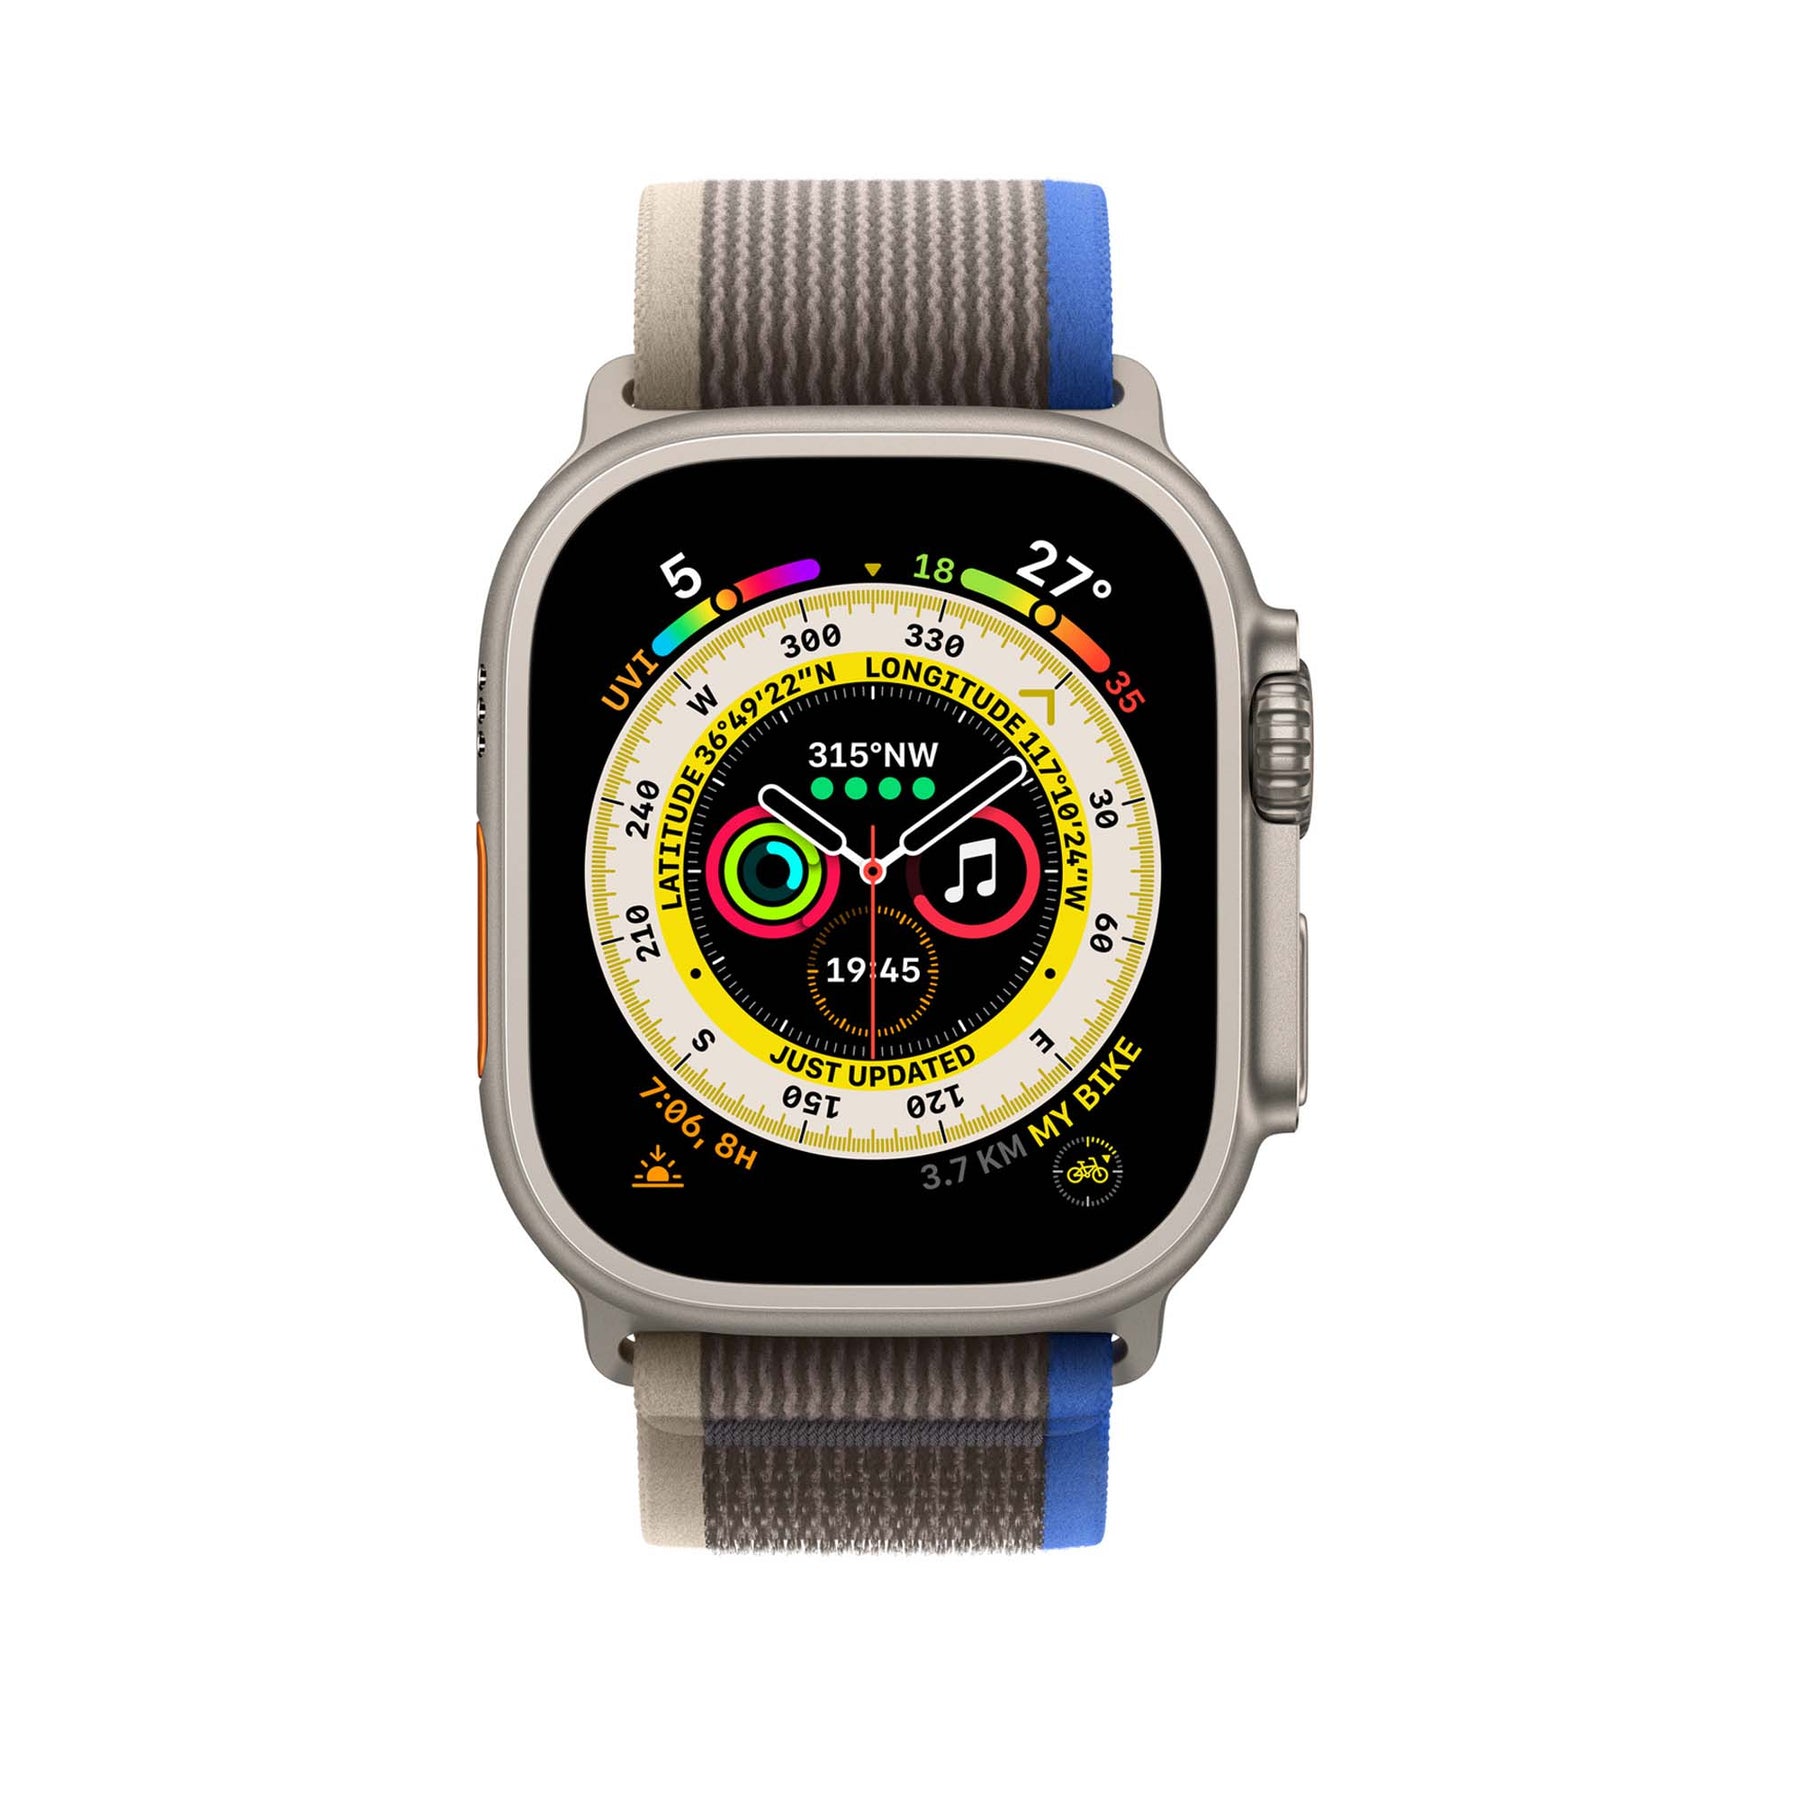 Apple Watch Ultra - Titanium Case with Blue/Grey Trail Loop